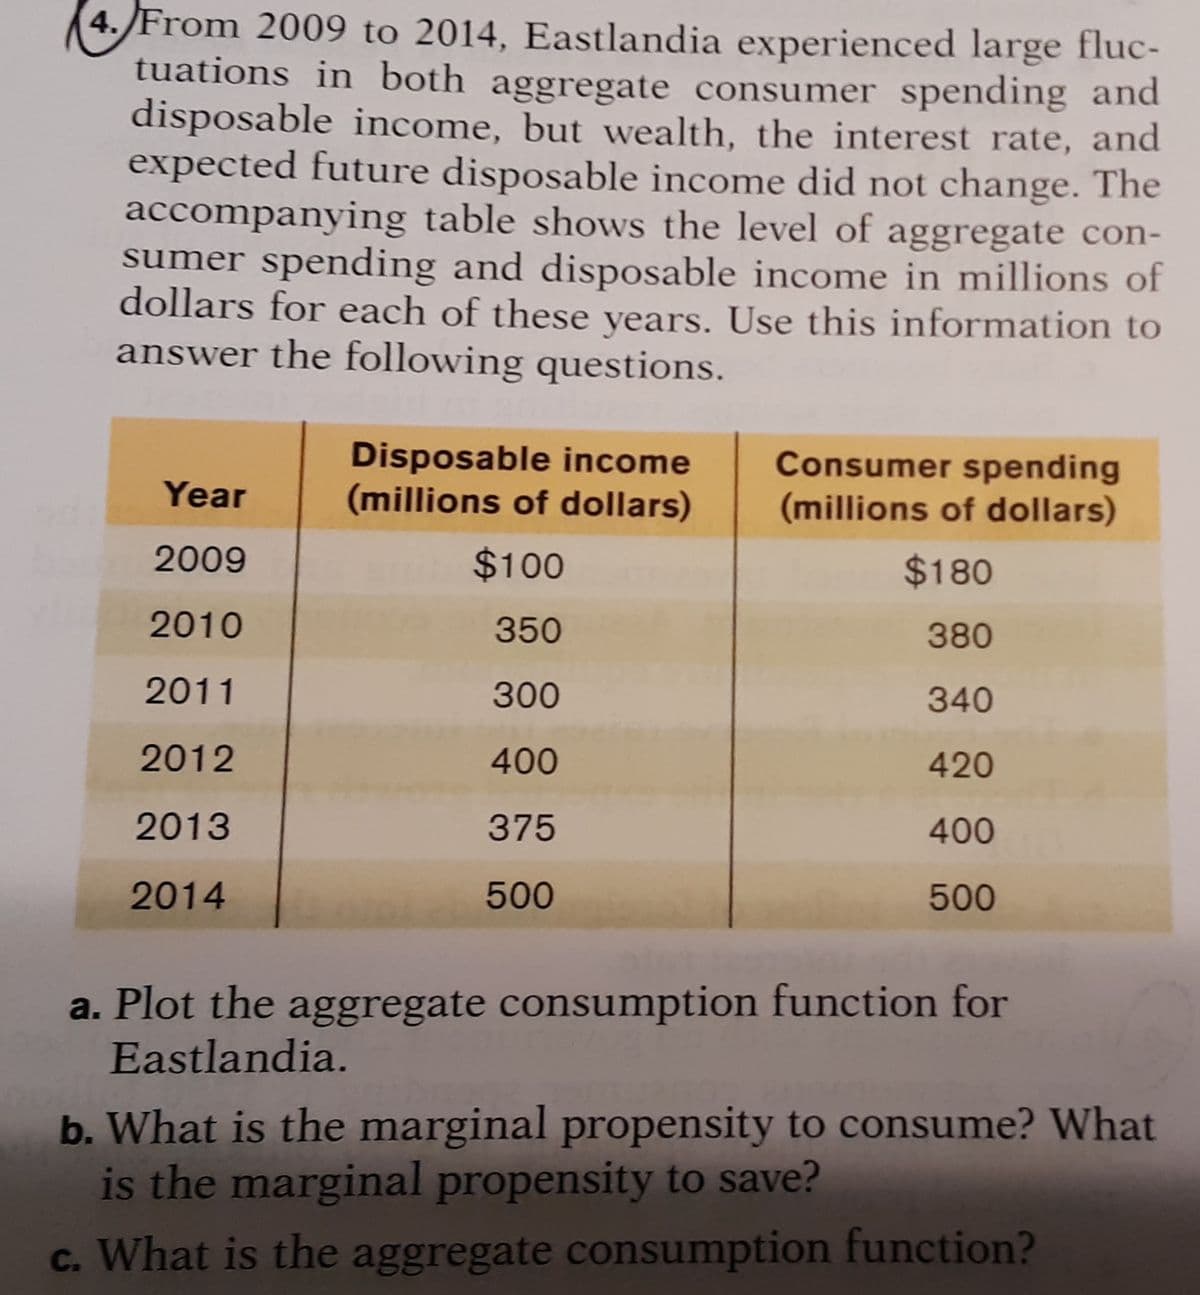 (4. From 2009 to 2014, Eastlandia experienced large fluc-
tuations in both aggregate consumer spending and
disposable income, but wealth, the interest rate, and
expected future disposable income did not change. The
accompanying table shows the level of aggregate con-
sumer spending and disposable income in millions of
dollars for each of these years. Use this information to
answer the following questions.
Disposable income
(millions of dollars)
Consumer spending
(millions of dollars)
Year
2009
$100
$180
2010
350
380
2011
300
340
2012
400
420
2013
375
400
2014
500
500
a. Plot the aggregate consumption function for
Eastlandia.
b. What is the marginal propensity to consume? What
is the marginal propensity to save?
c. What is the aggregate consumption function?
